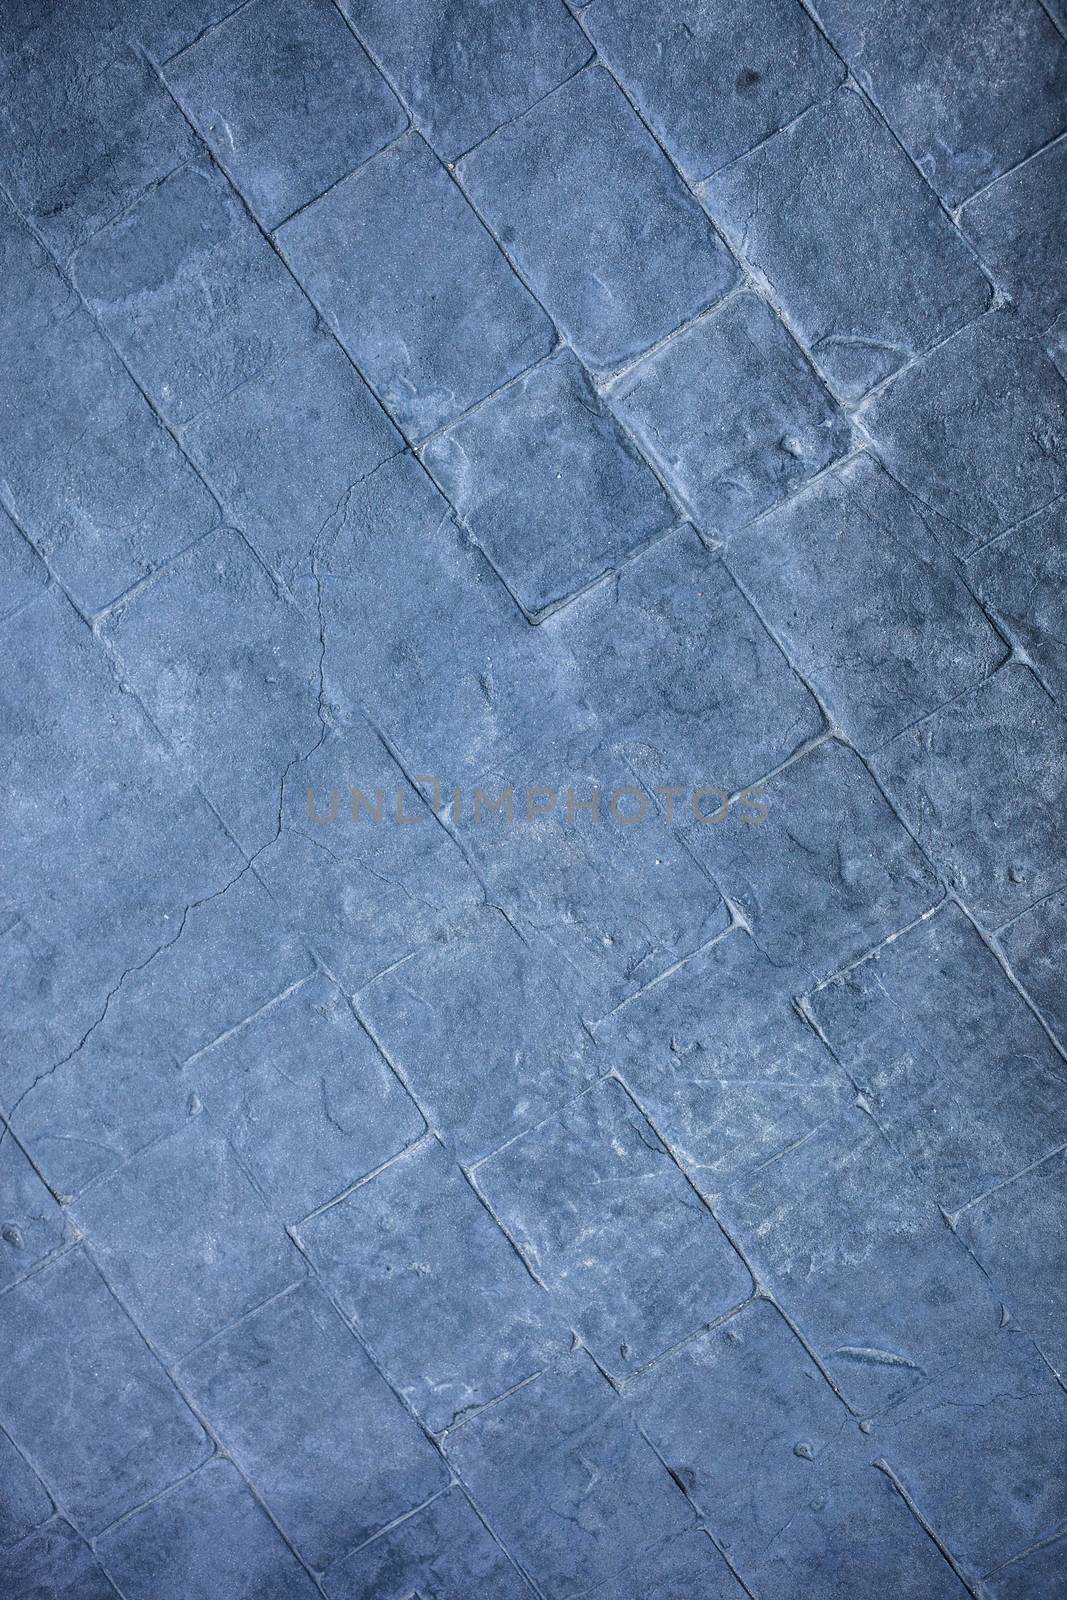 Slate texture flooring a popular choice for modern bathrooms by nopparats